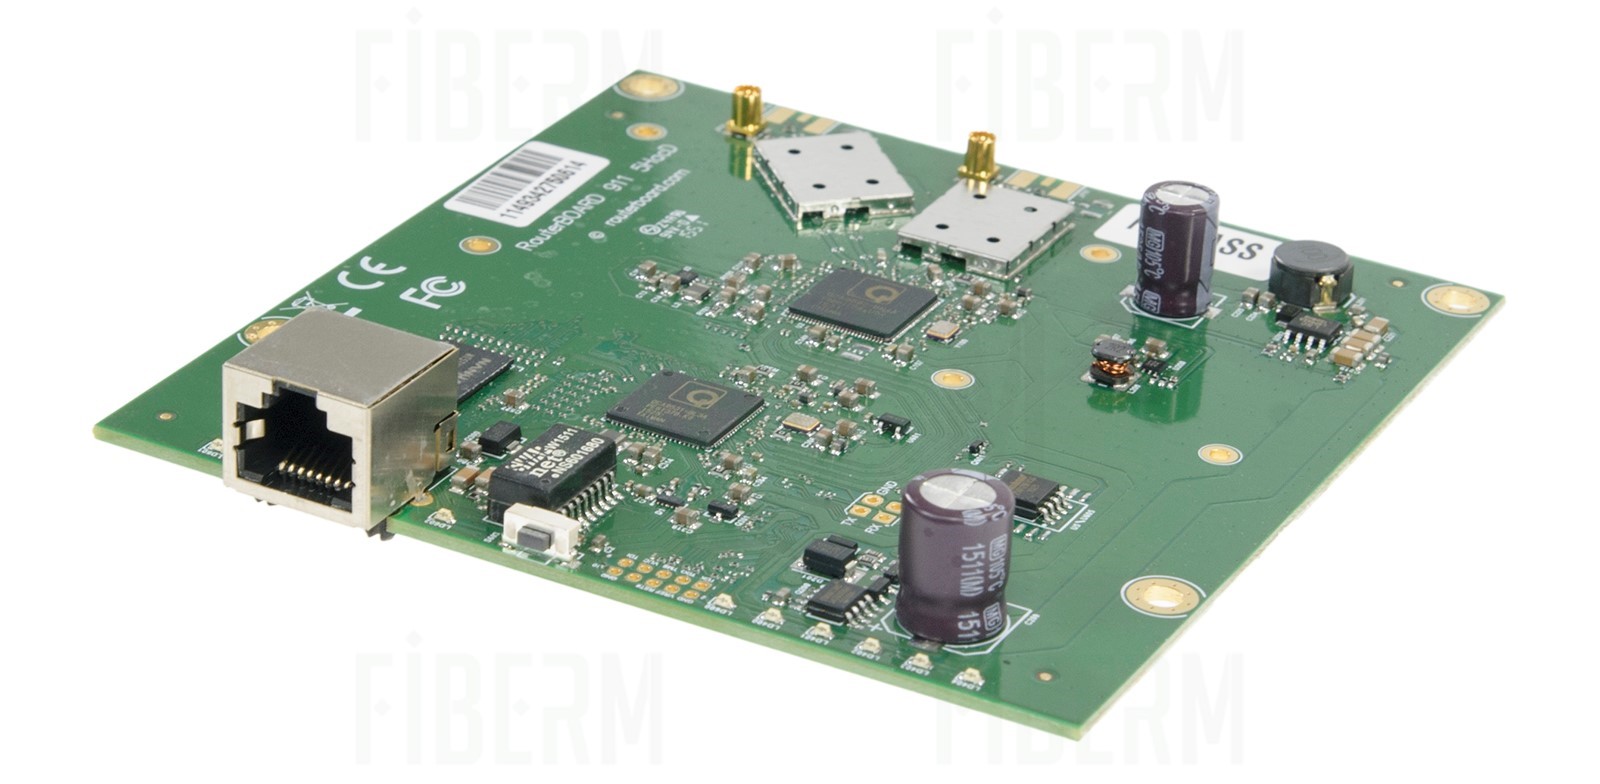 Mikrotik RouterBoard 911 lite5 ac RB911-5HacD